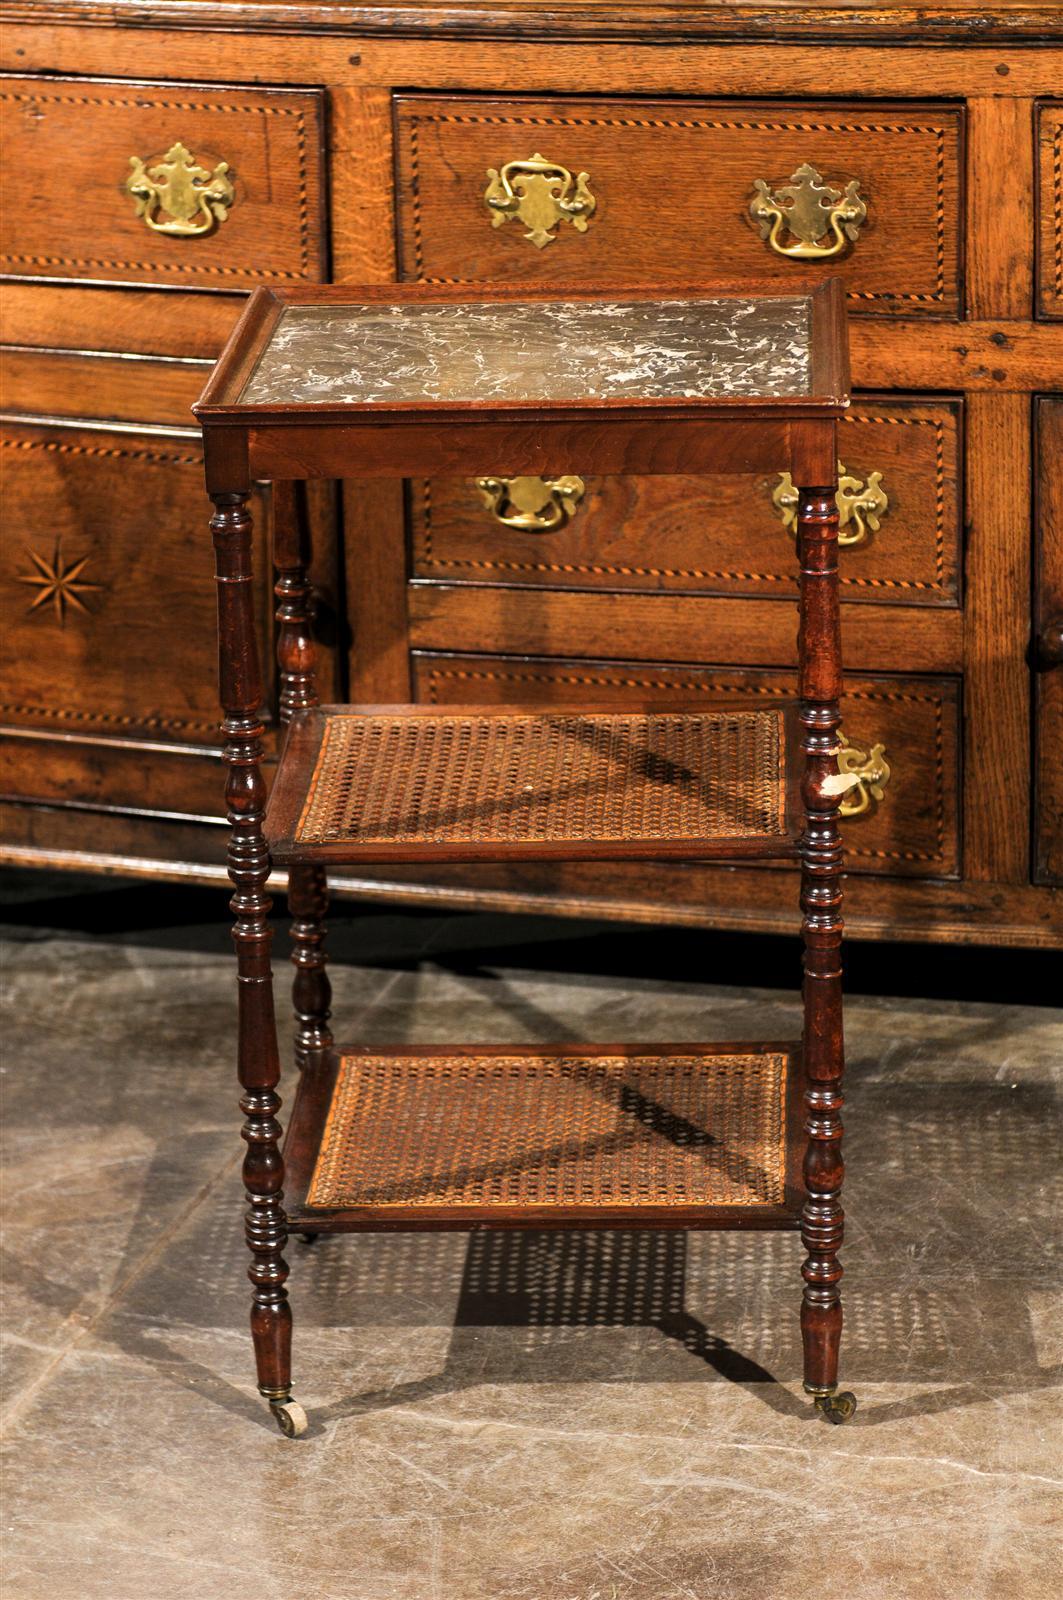 French Mid-19th Century Etagere or Trolley with Cane Shelves and Marble-Top 1